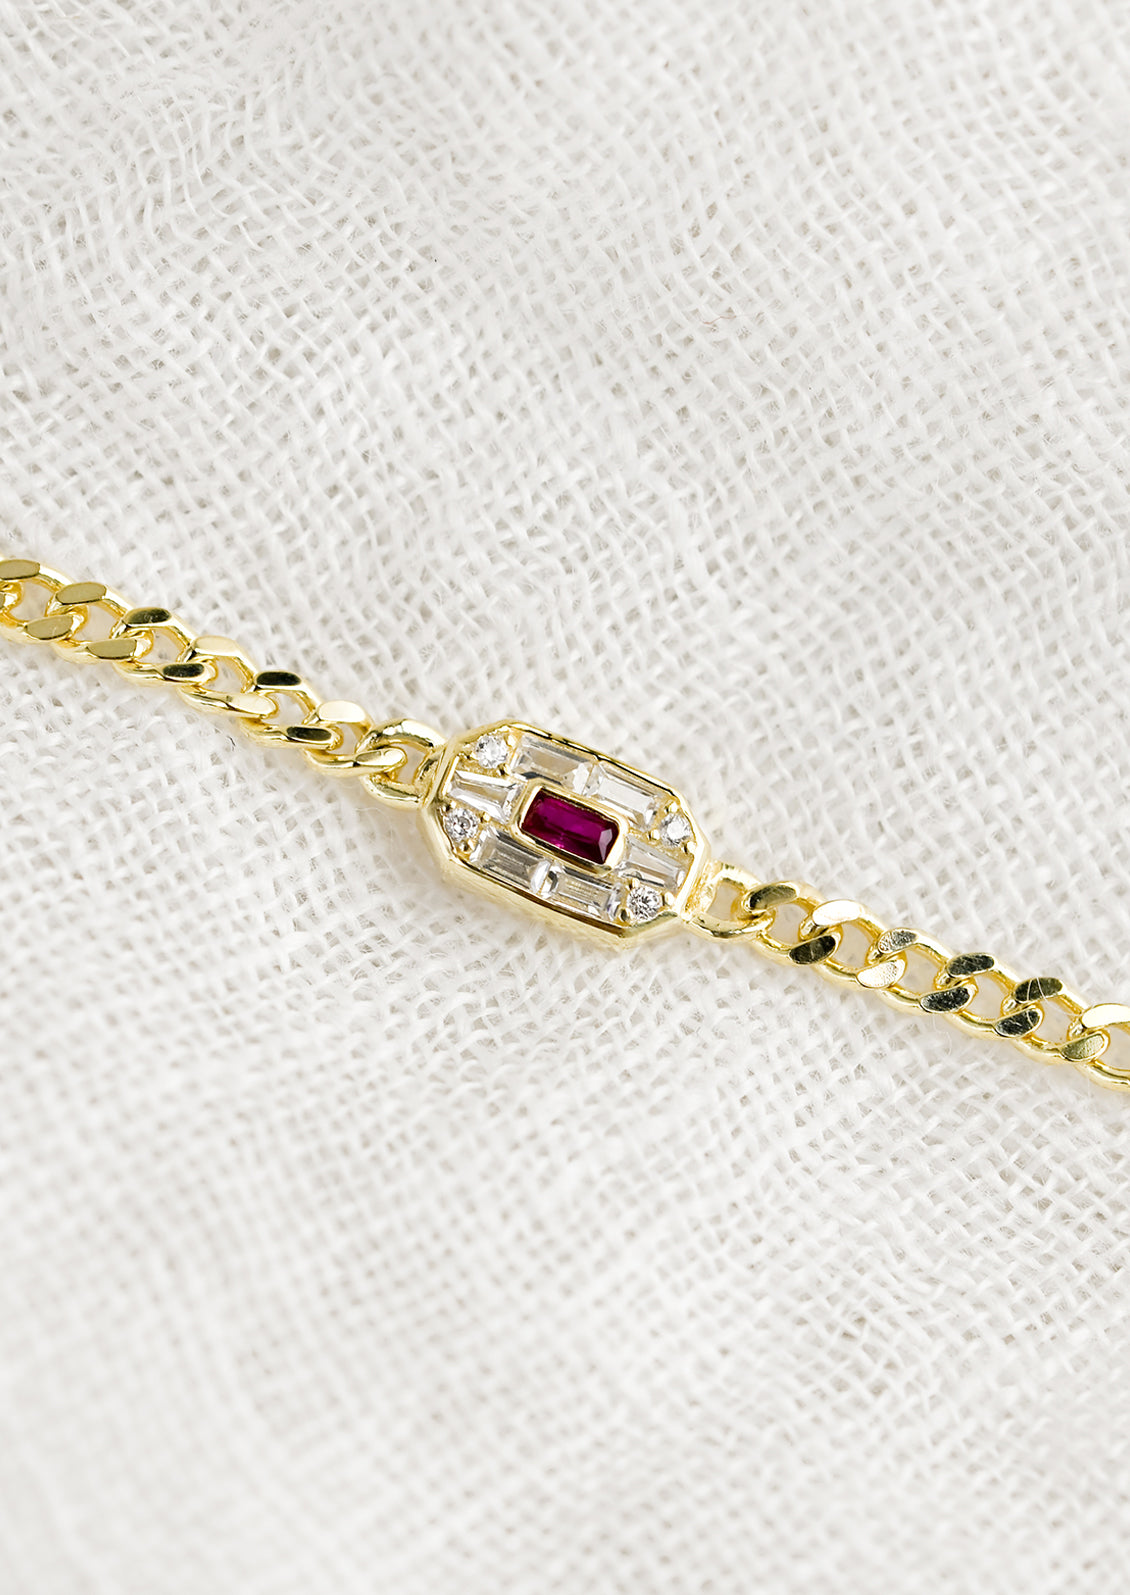 Trendy Jewelry At Offer Price Genuine Ruby Bracelet 925 Sterling Silve